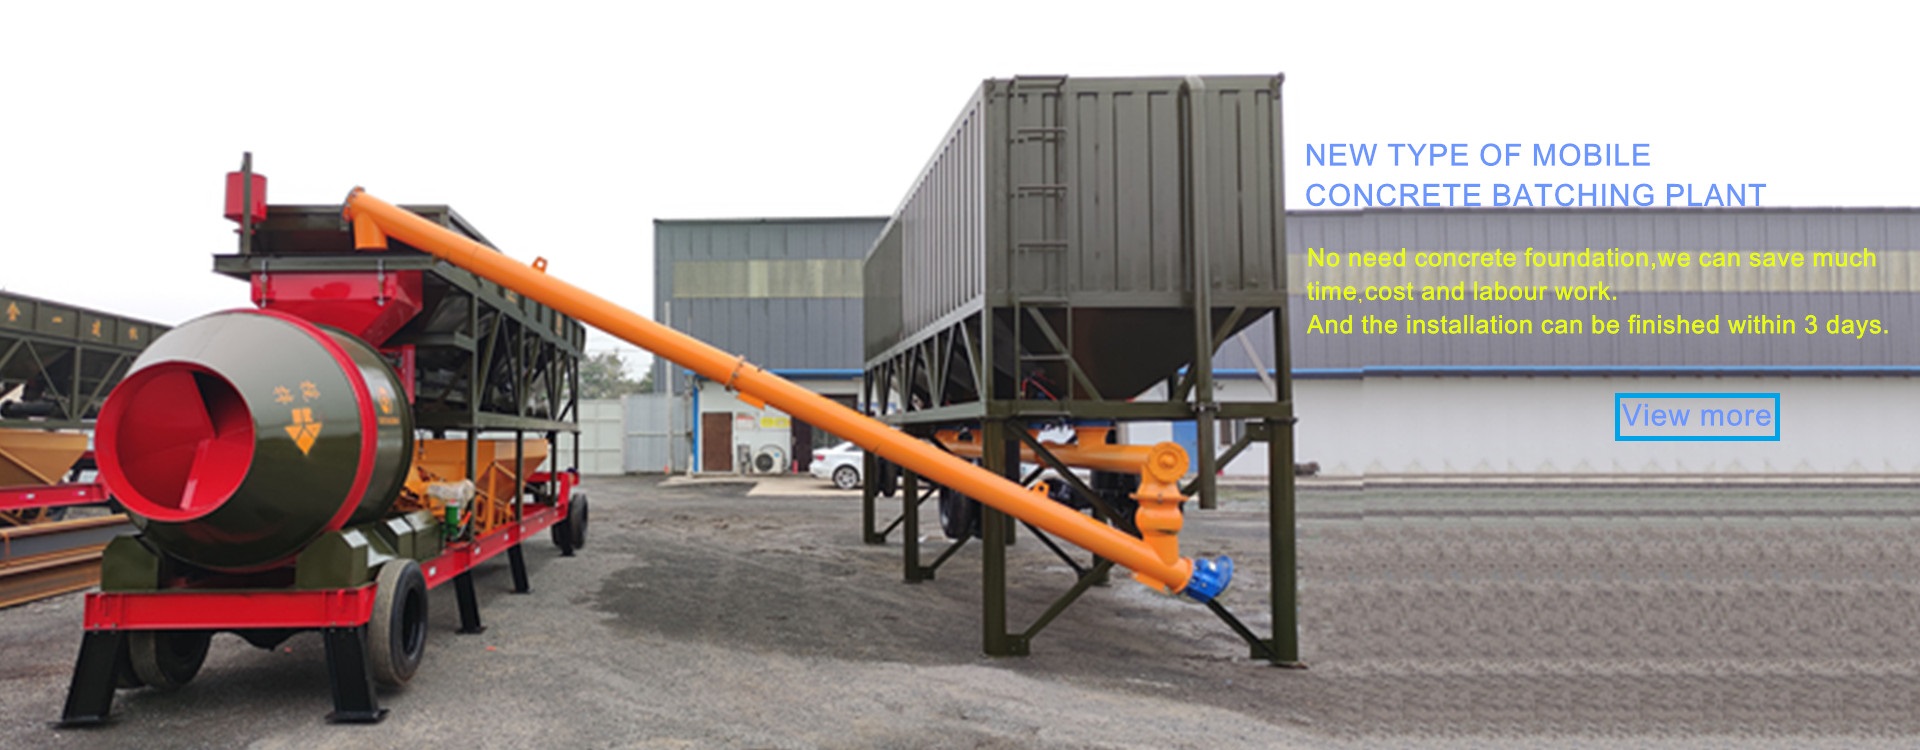 New type mobile concrete batching plant